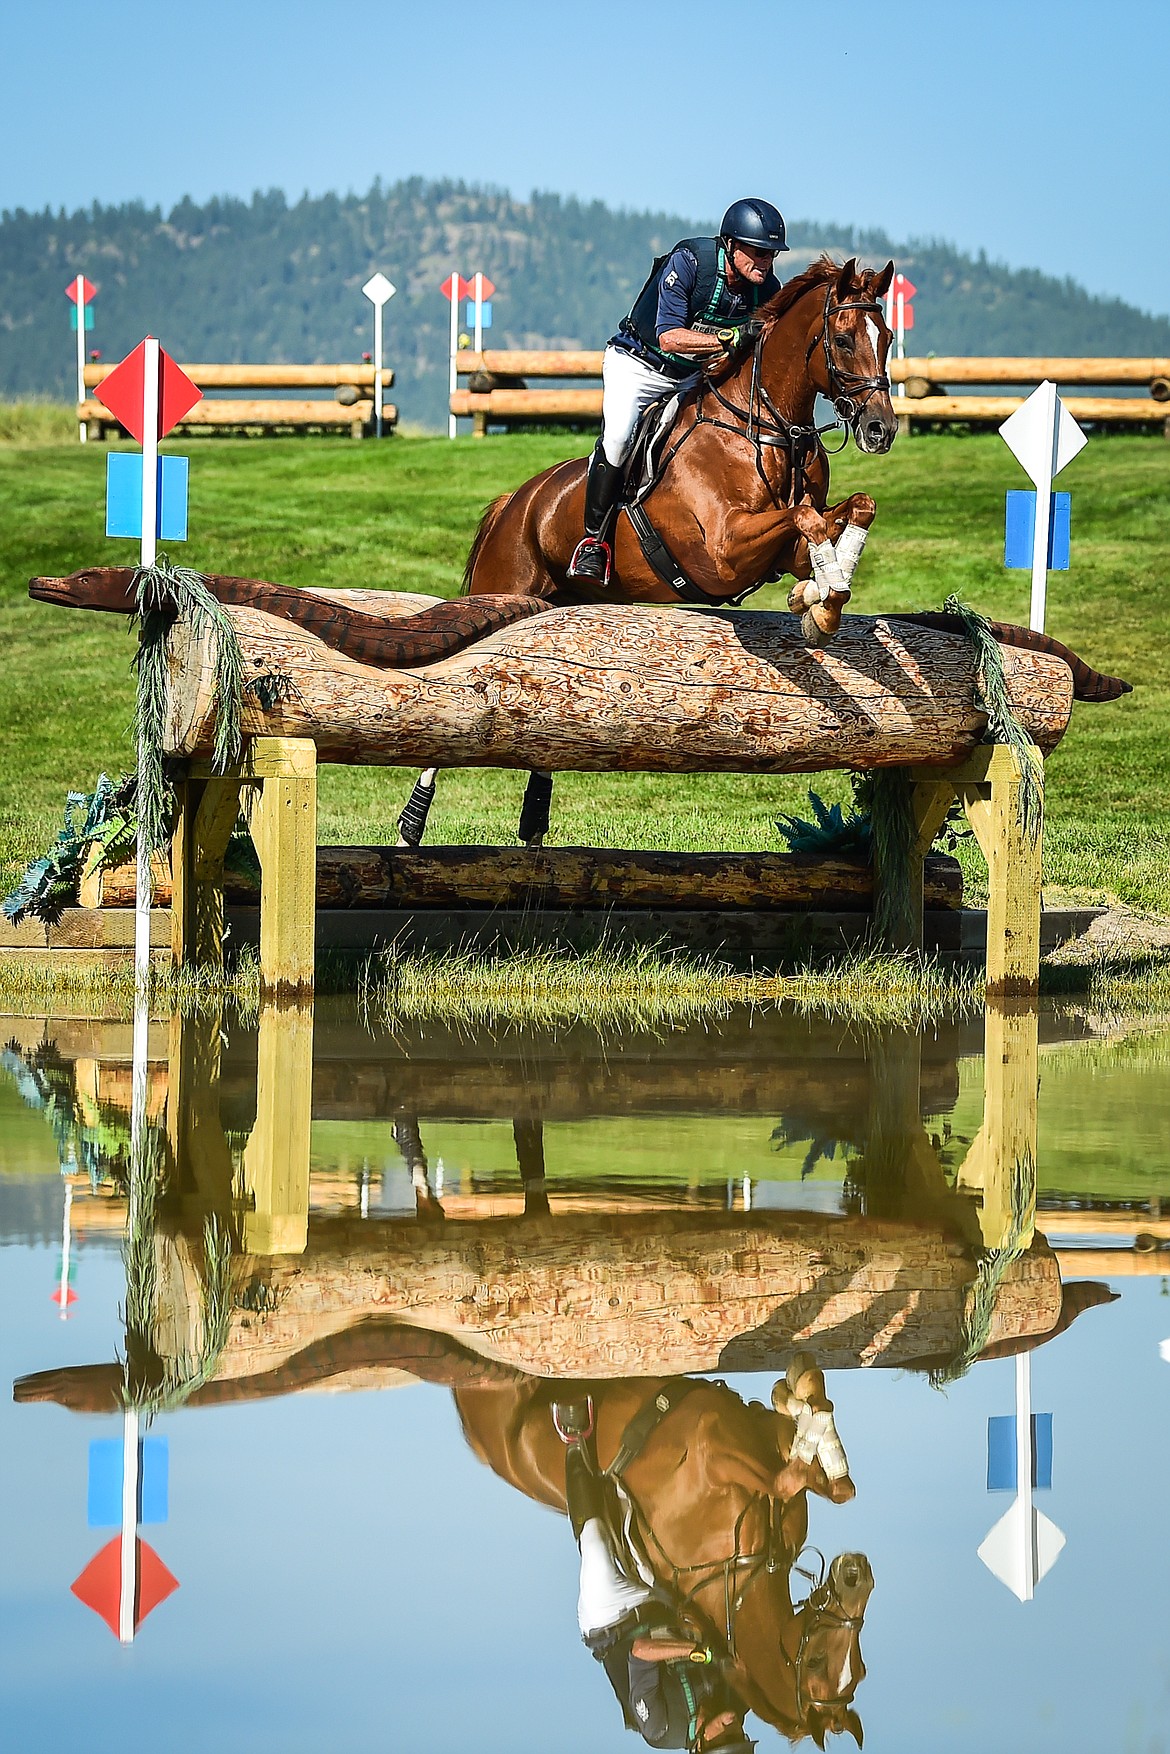 Kyle Carter rides Gstar Van De Klinkenberg over a jump into a water feature during CCI4*L cross-country at The Event at Rebecca Farm on Saturday, July 22. (Casey Kreider/Daily Inter Lake)